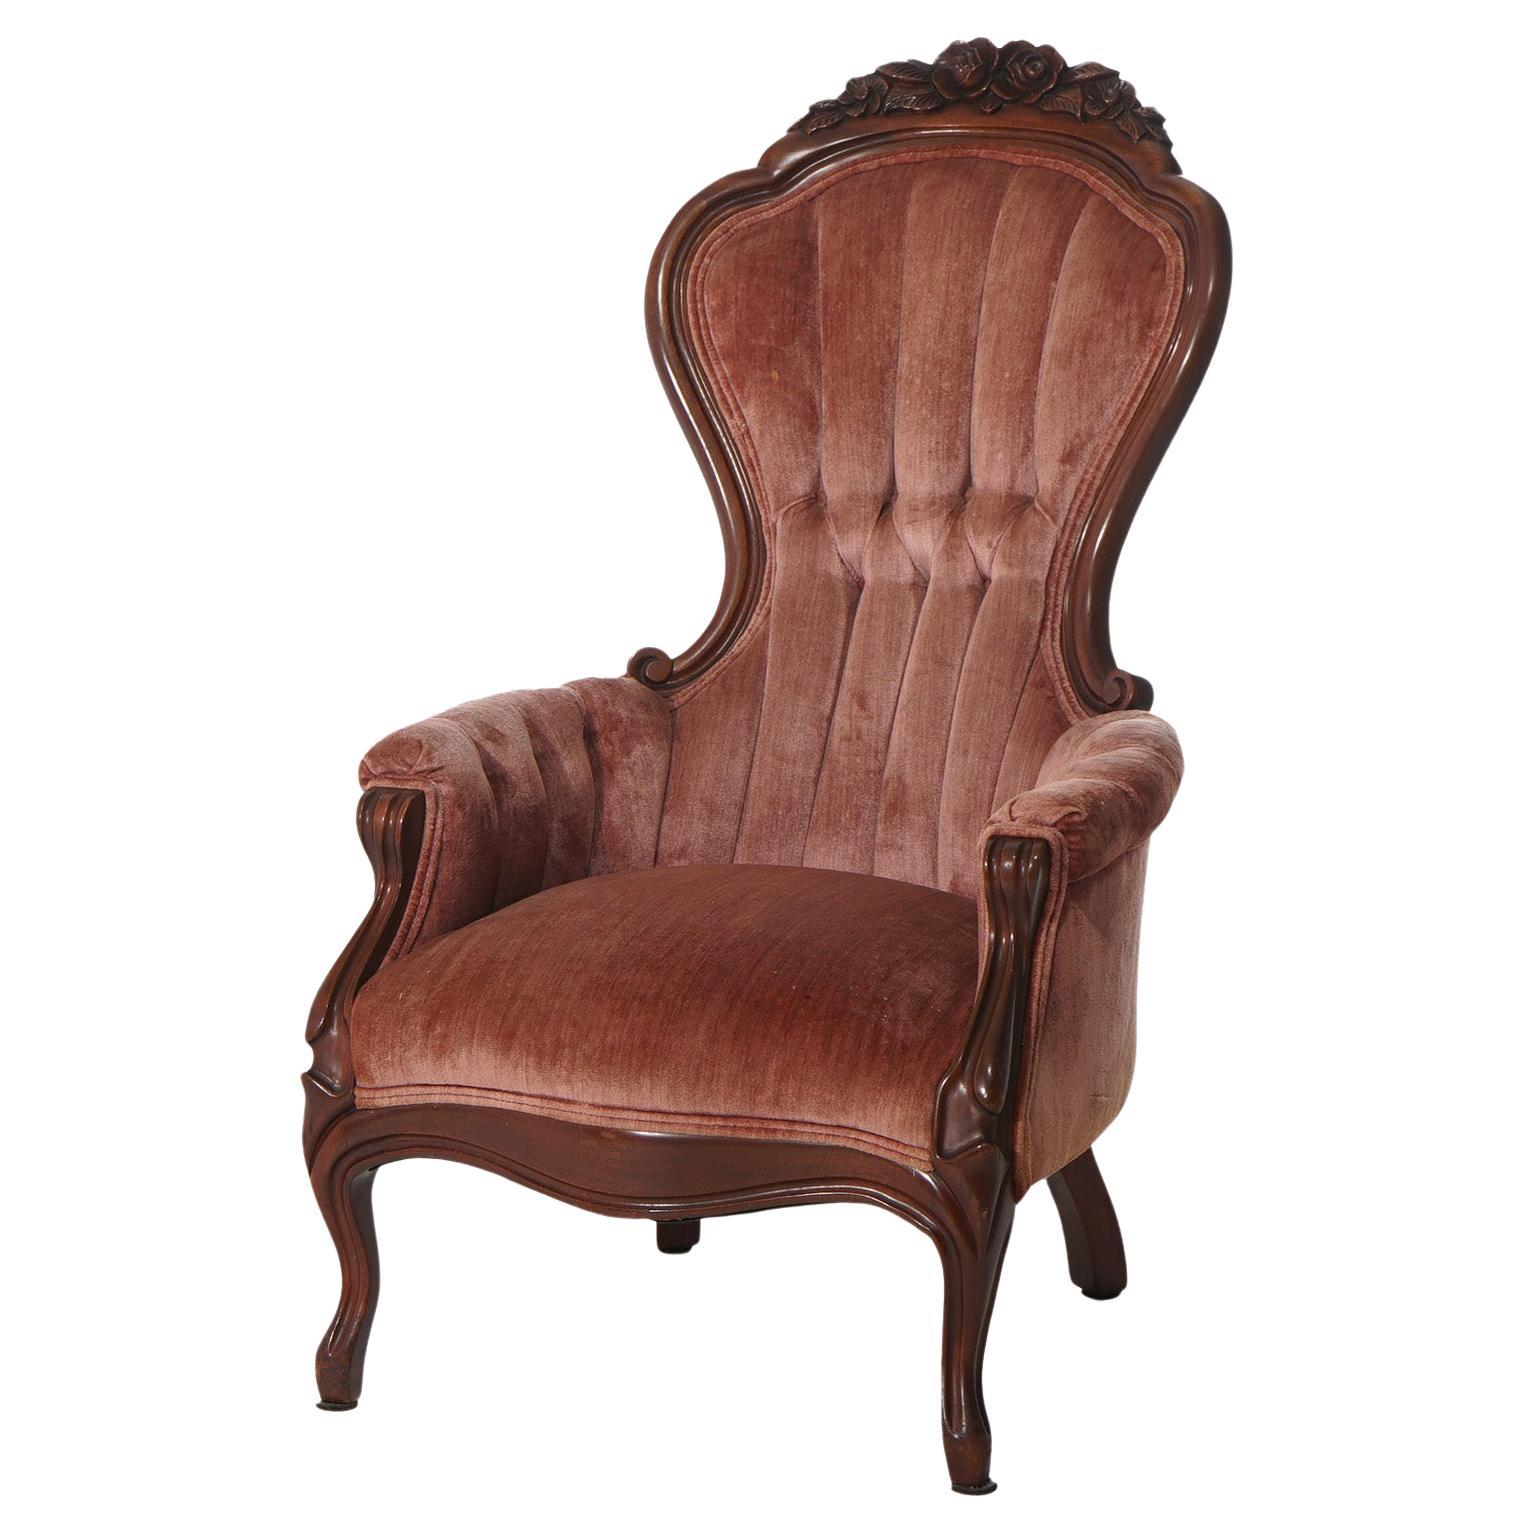 Antique Oversized Carved Walnut Armchair with Carved Floral Elements C1890 For Sale